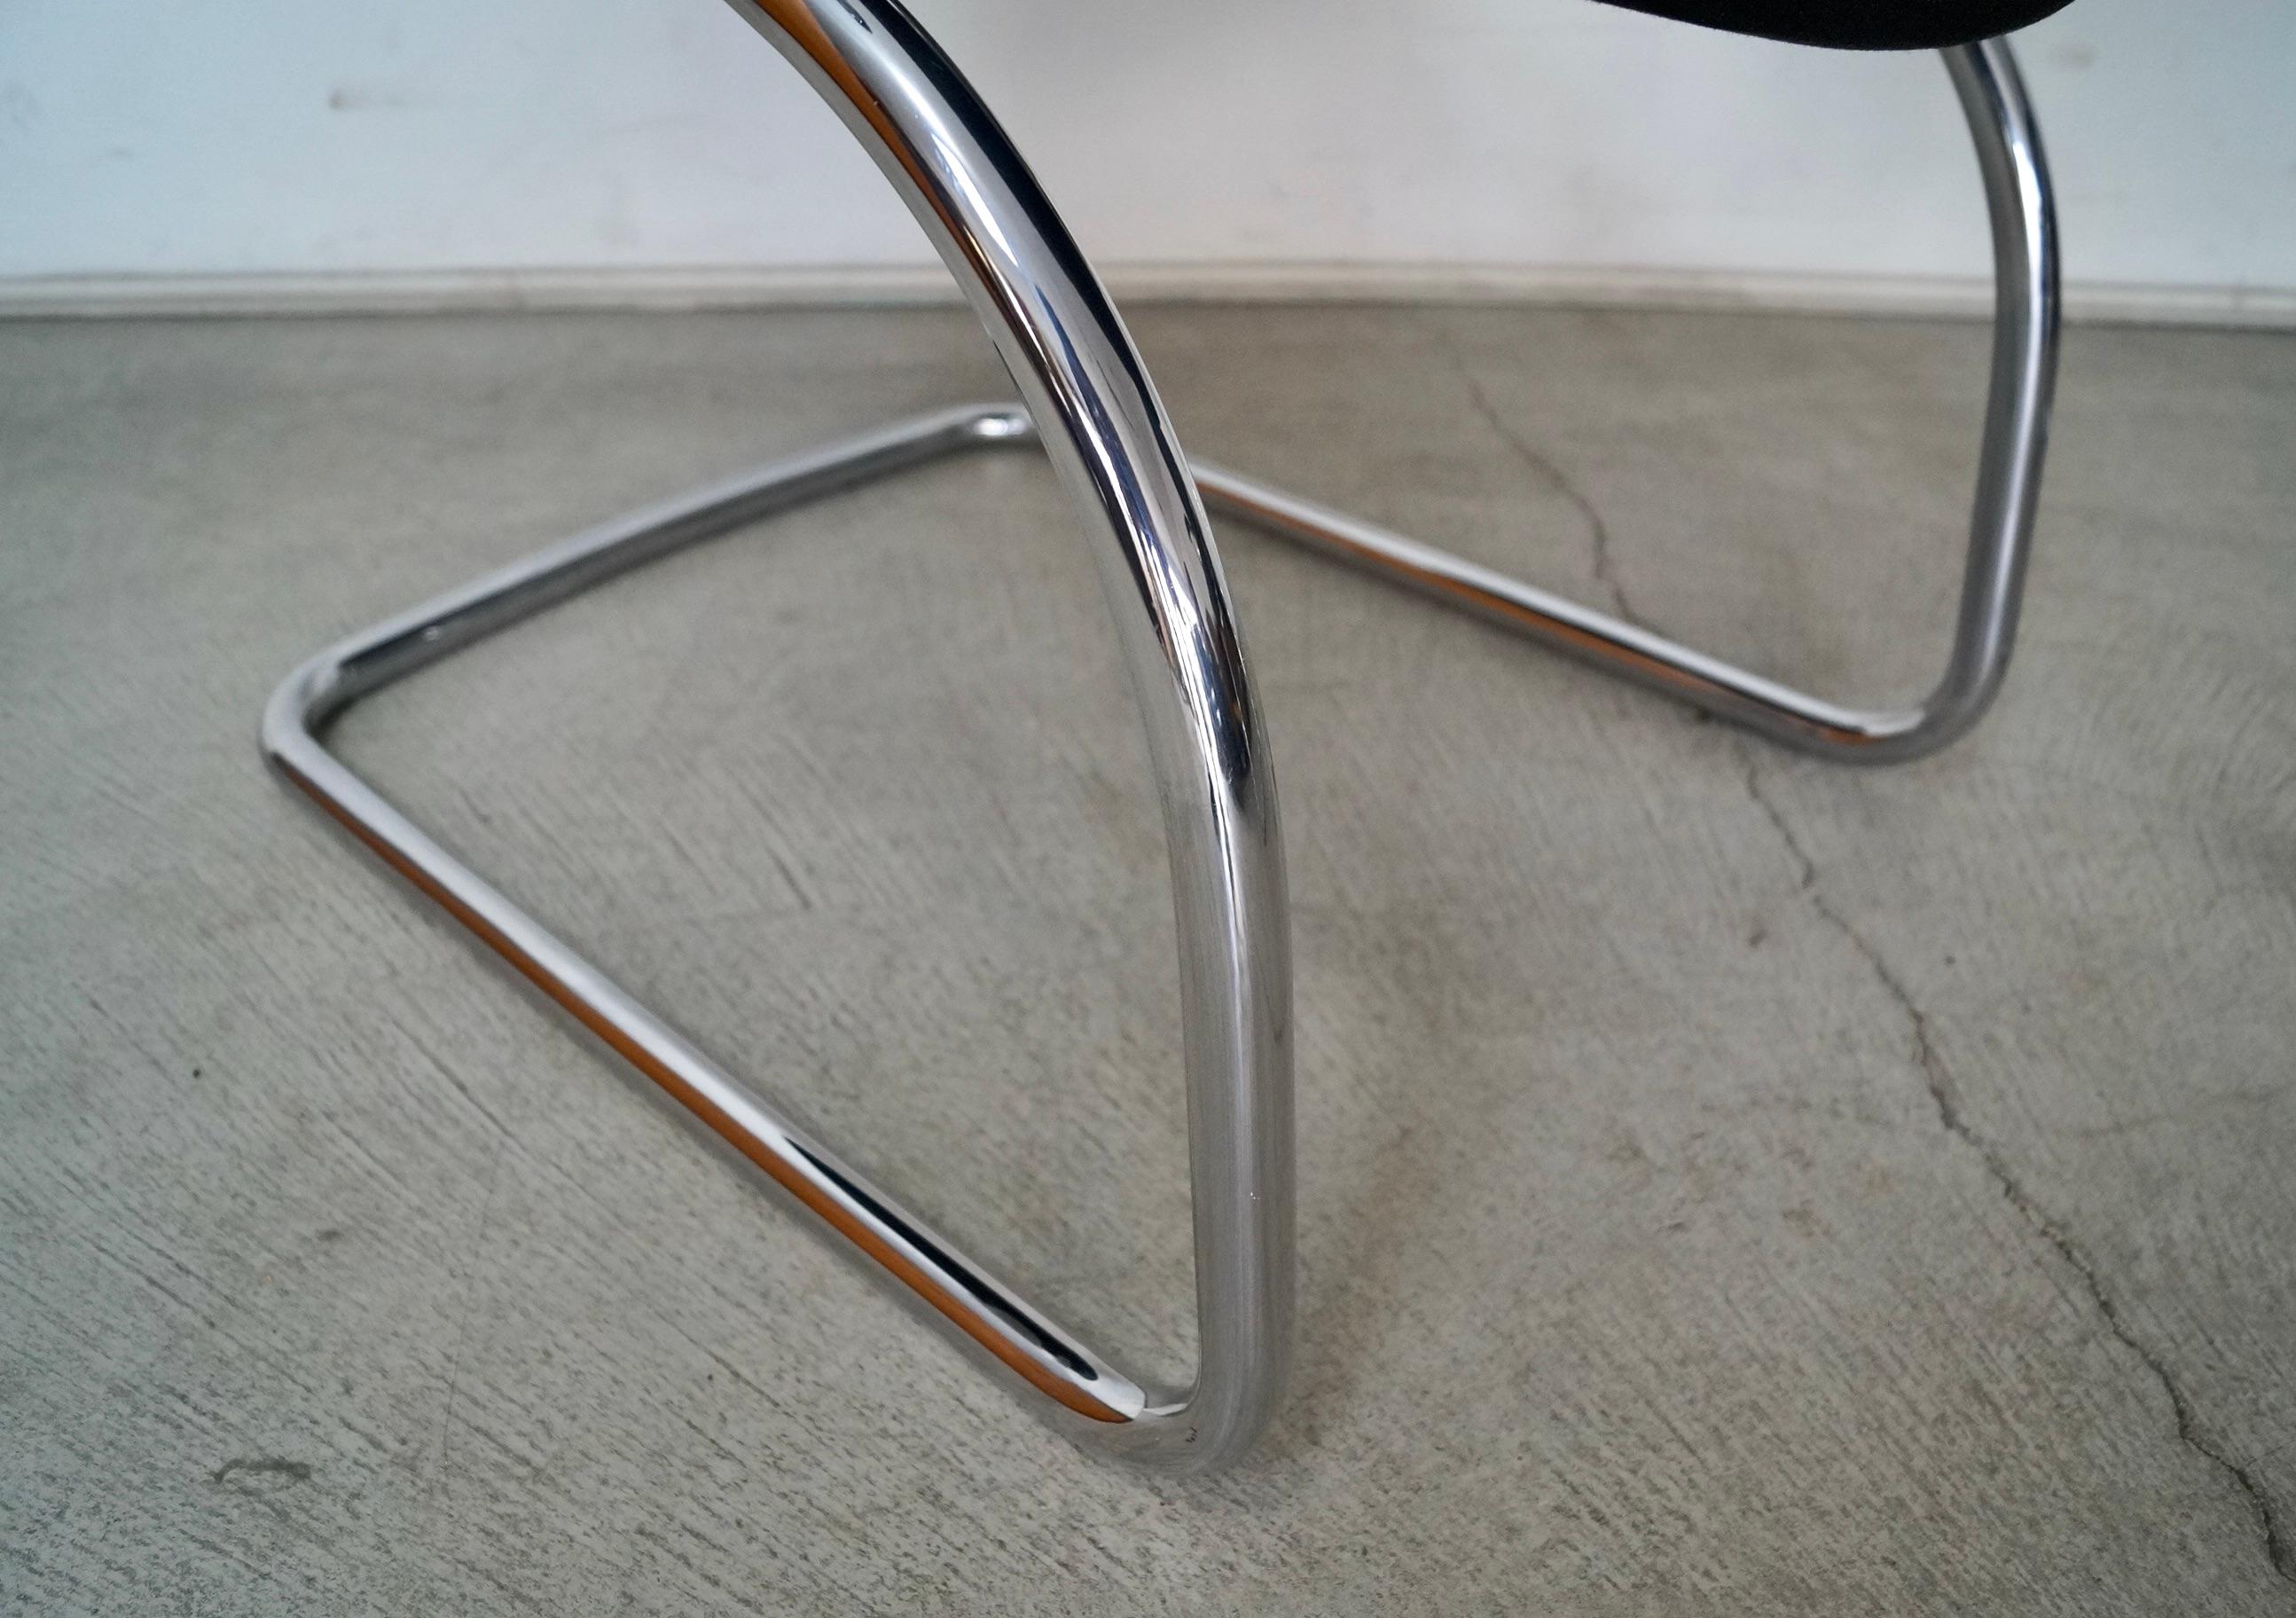 1990's Postmodern German Chrome Cantilever Arm Chairs - A Pair For Sale 12